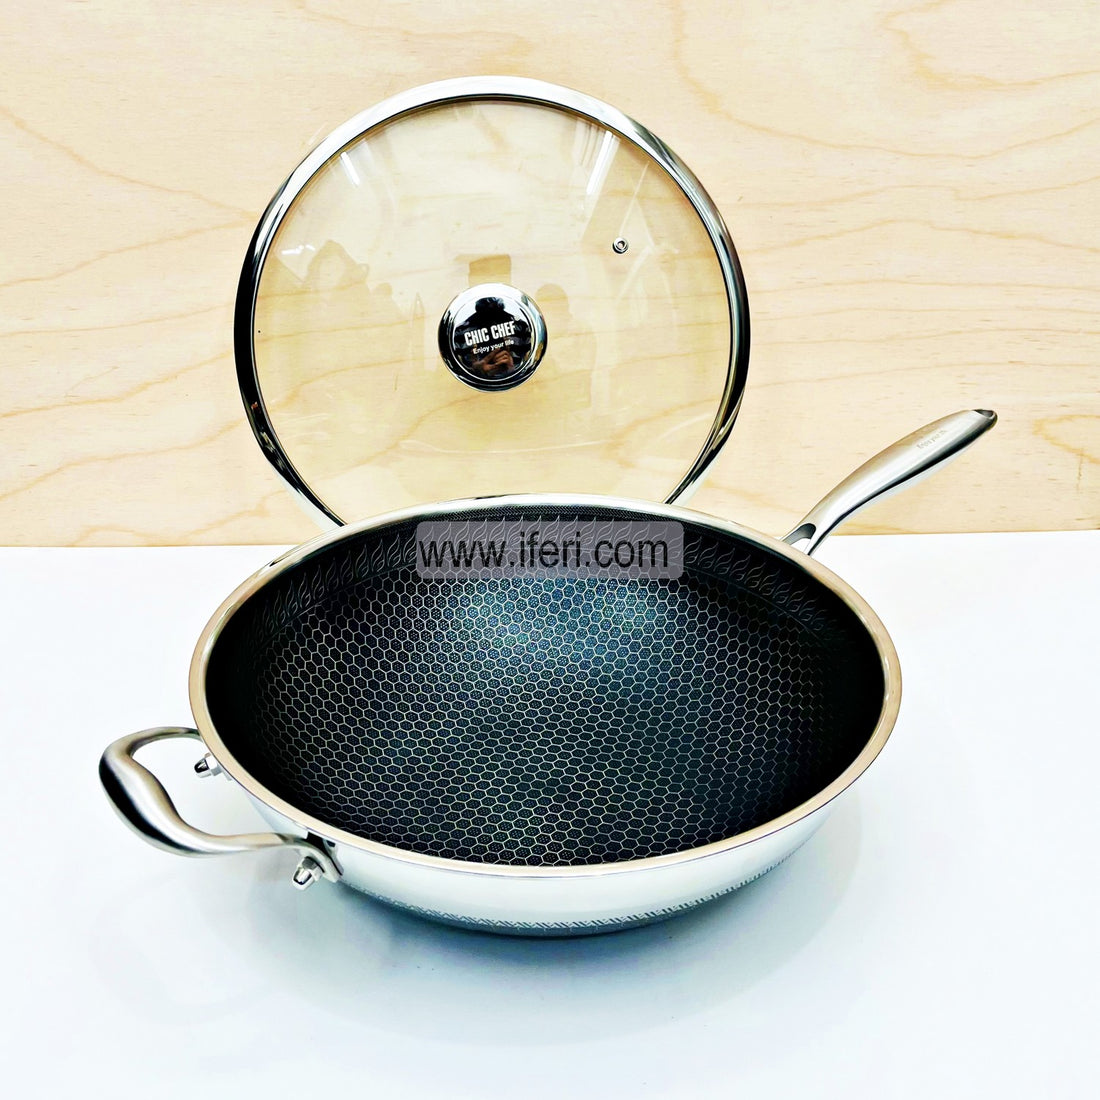 32 cm Stainless Steel Non-Stick Honeycomb Wok Pan With Glass Lid RY4683